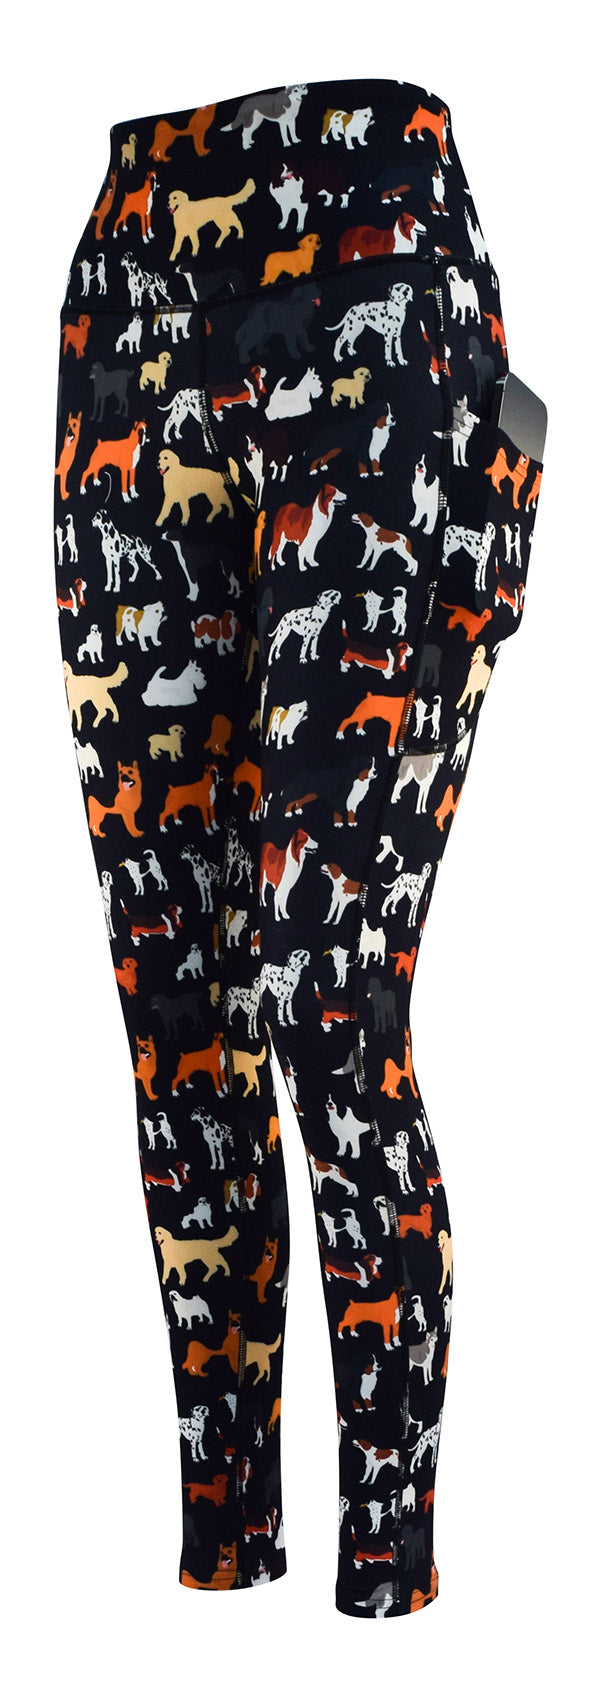 Who Let The Dogs Out + Pockets-Adult Pocket Leggings